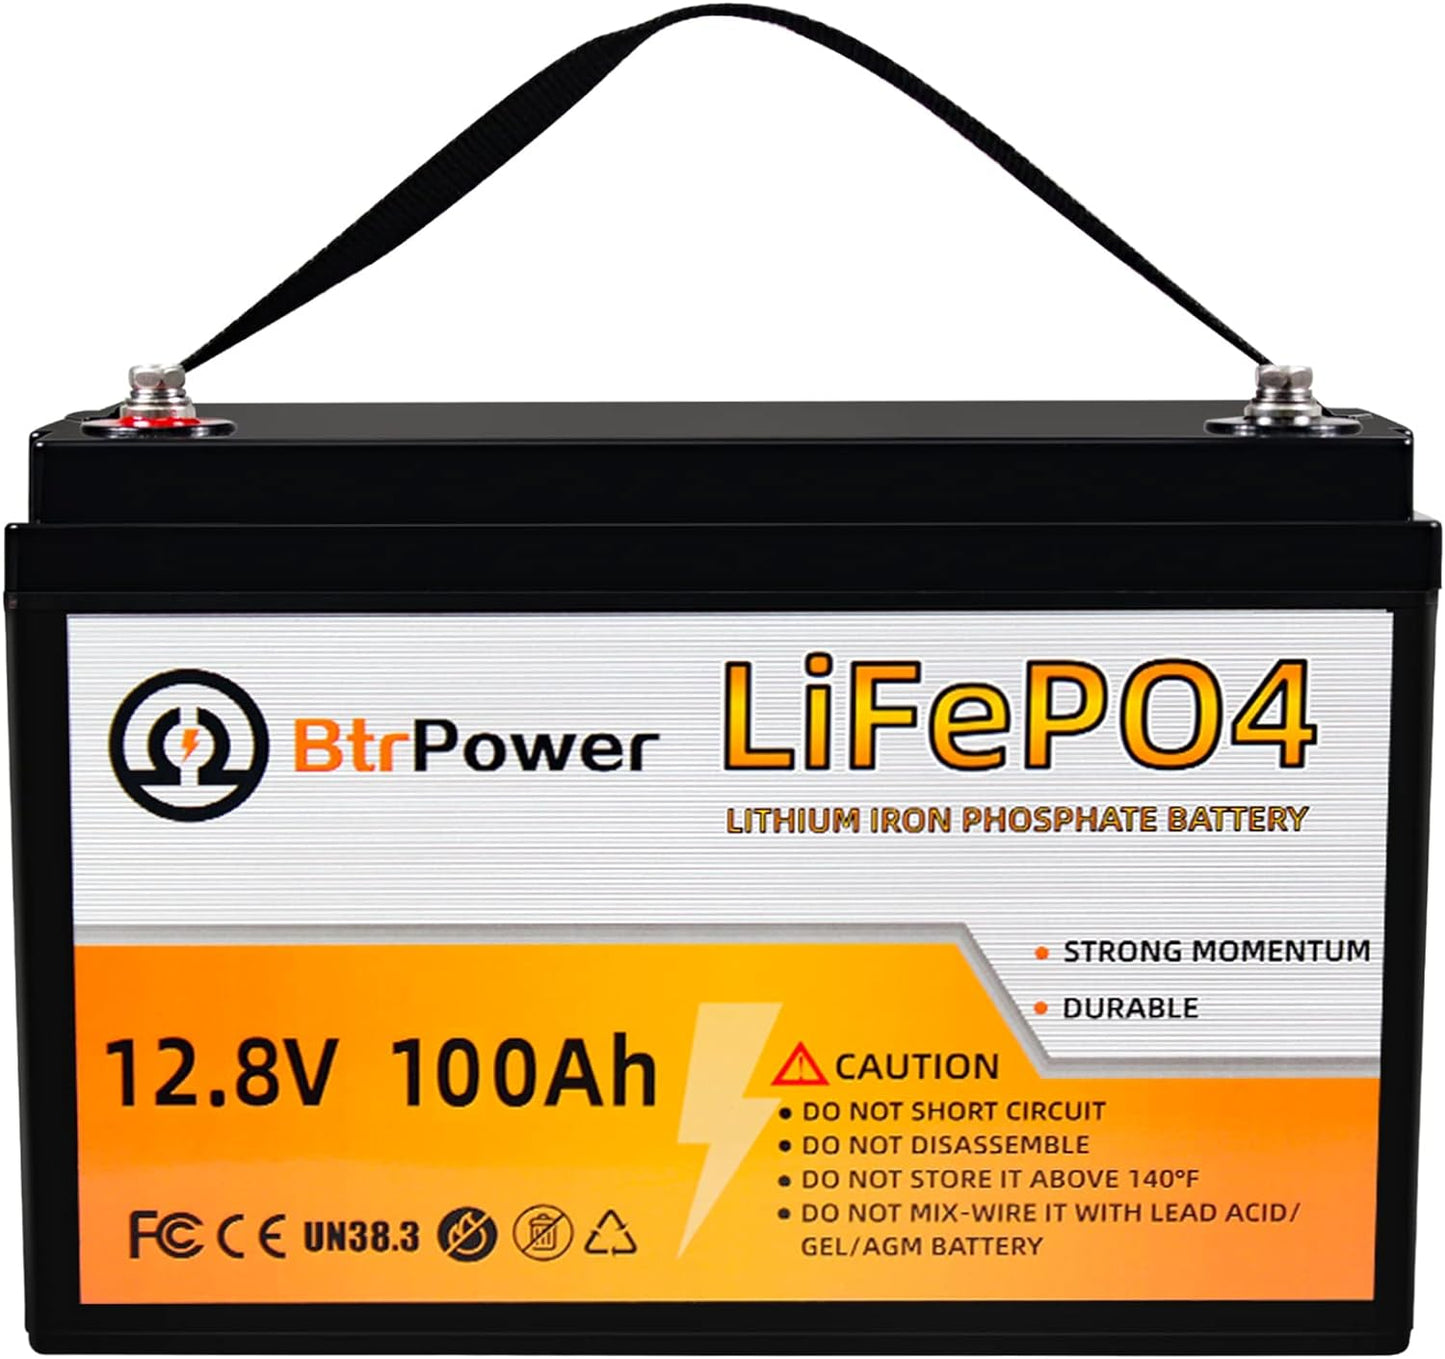 12V 100AH Lifepo4 Lithium Battery, 5000+ Cycles Deep Cycle Lifepo4 Battery with Built-In 100A BMS Fit for RV, Home Storage,Trolling Motor,Off-Grid System,Solar Power System,Marine